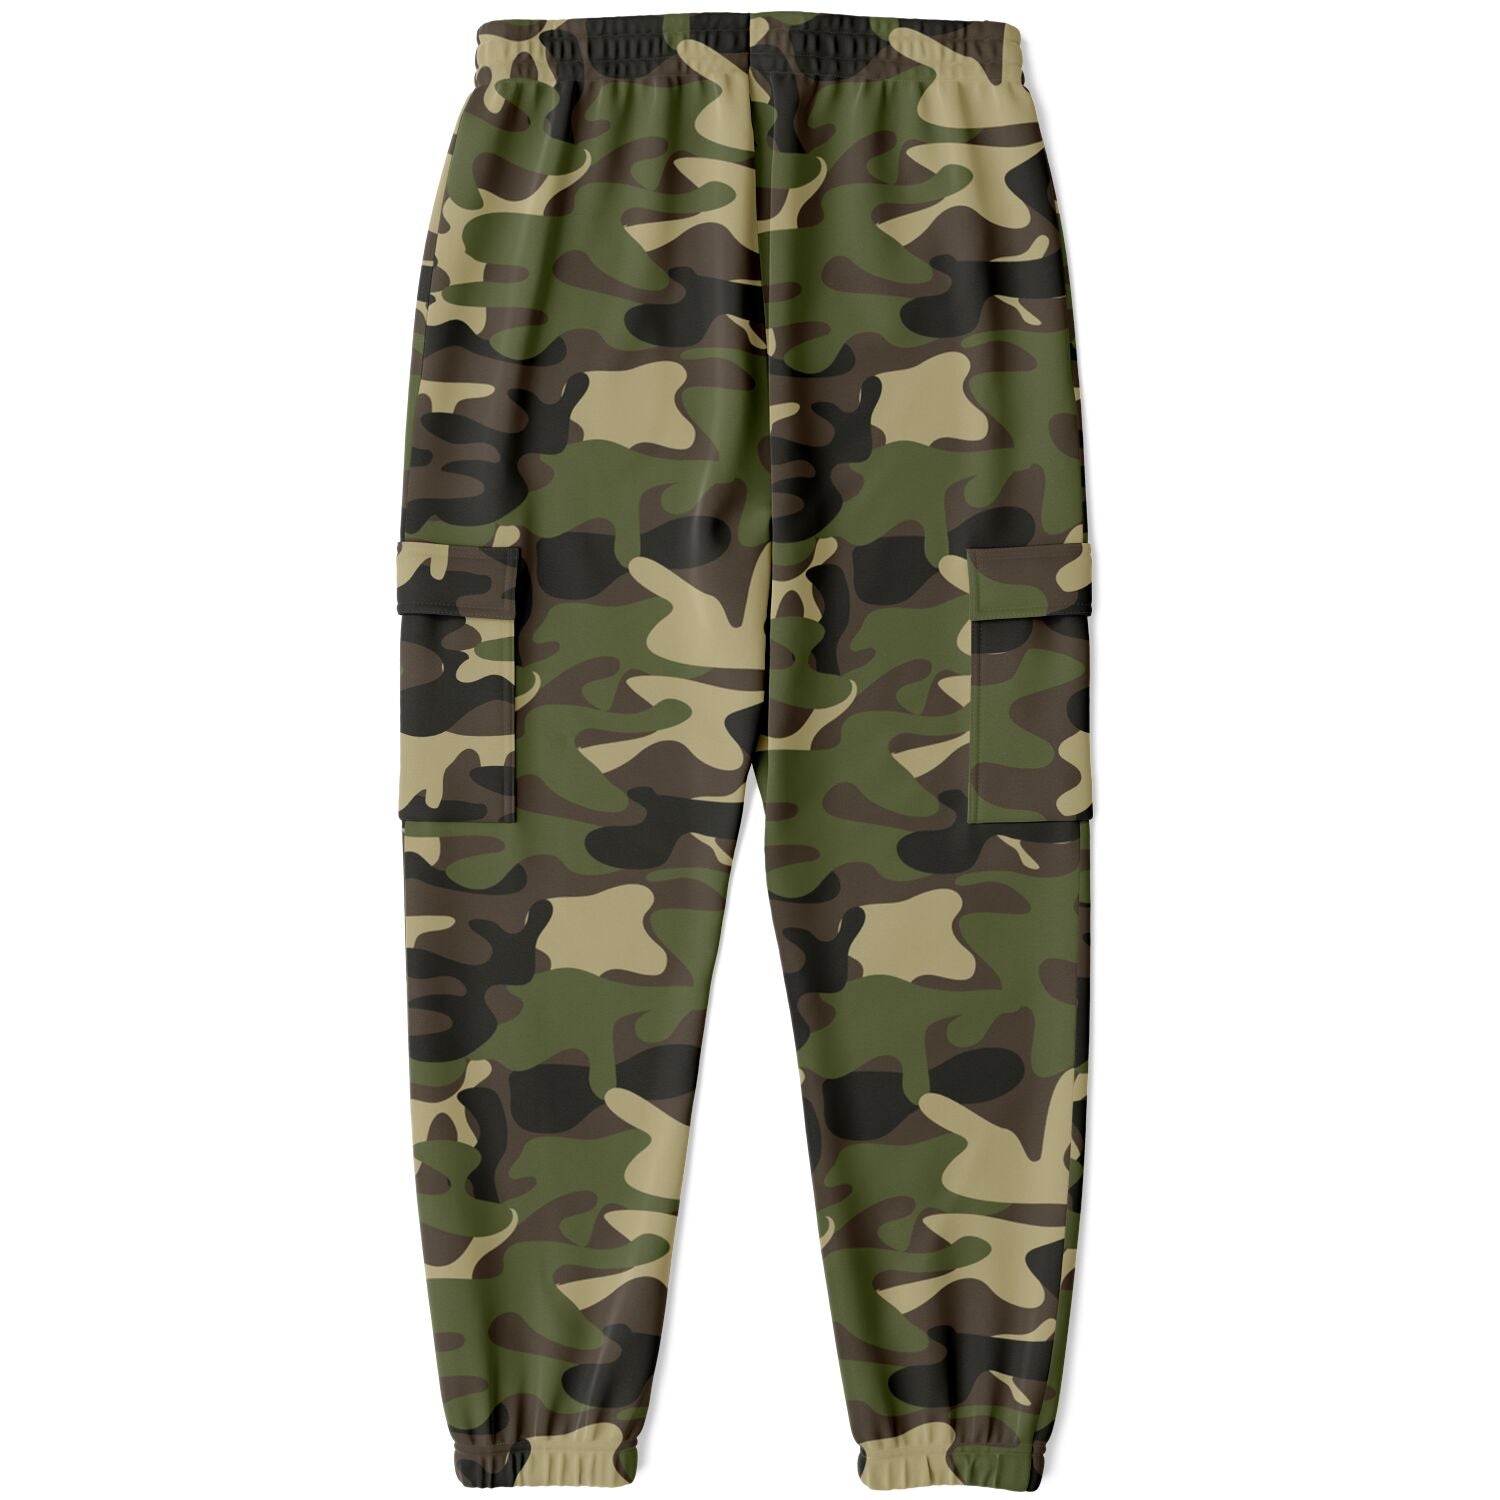 How to style green army pants